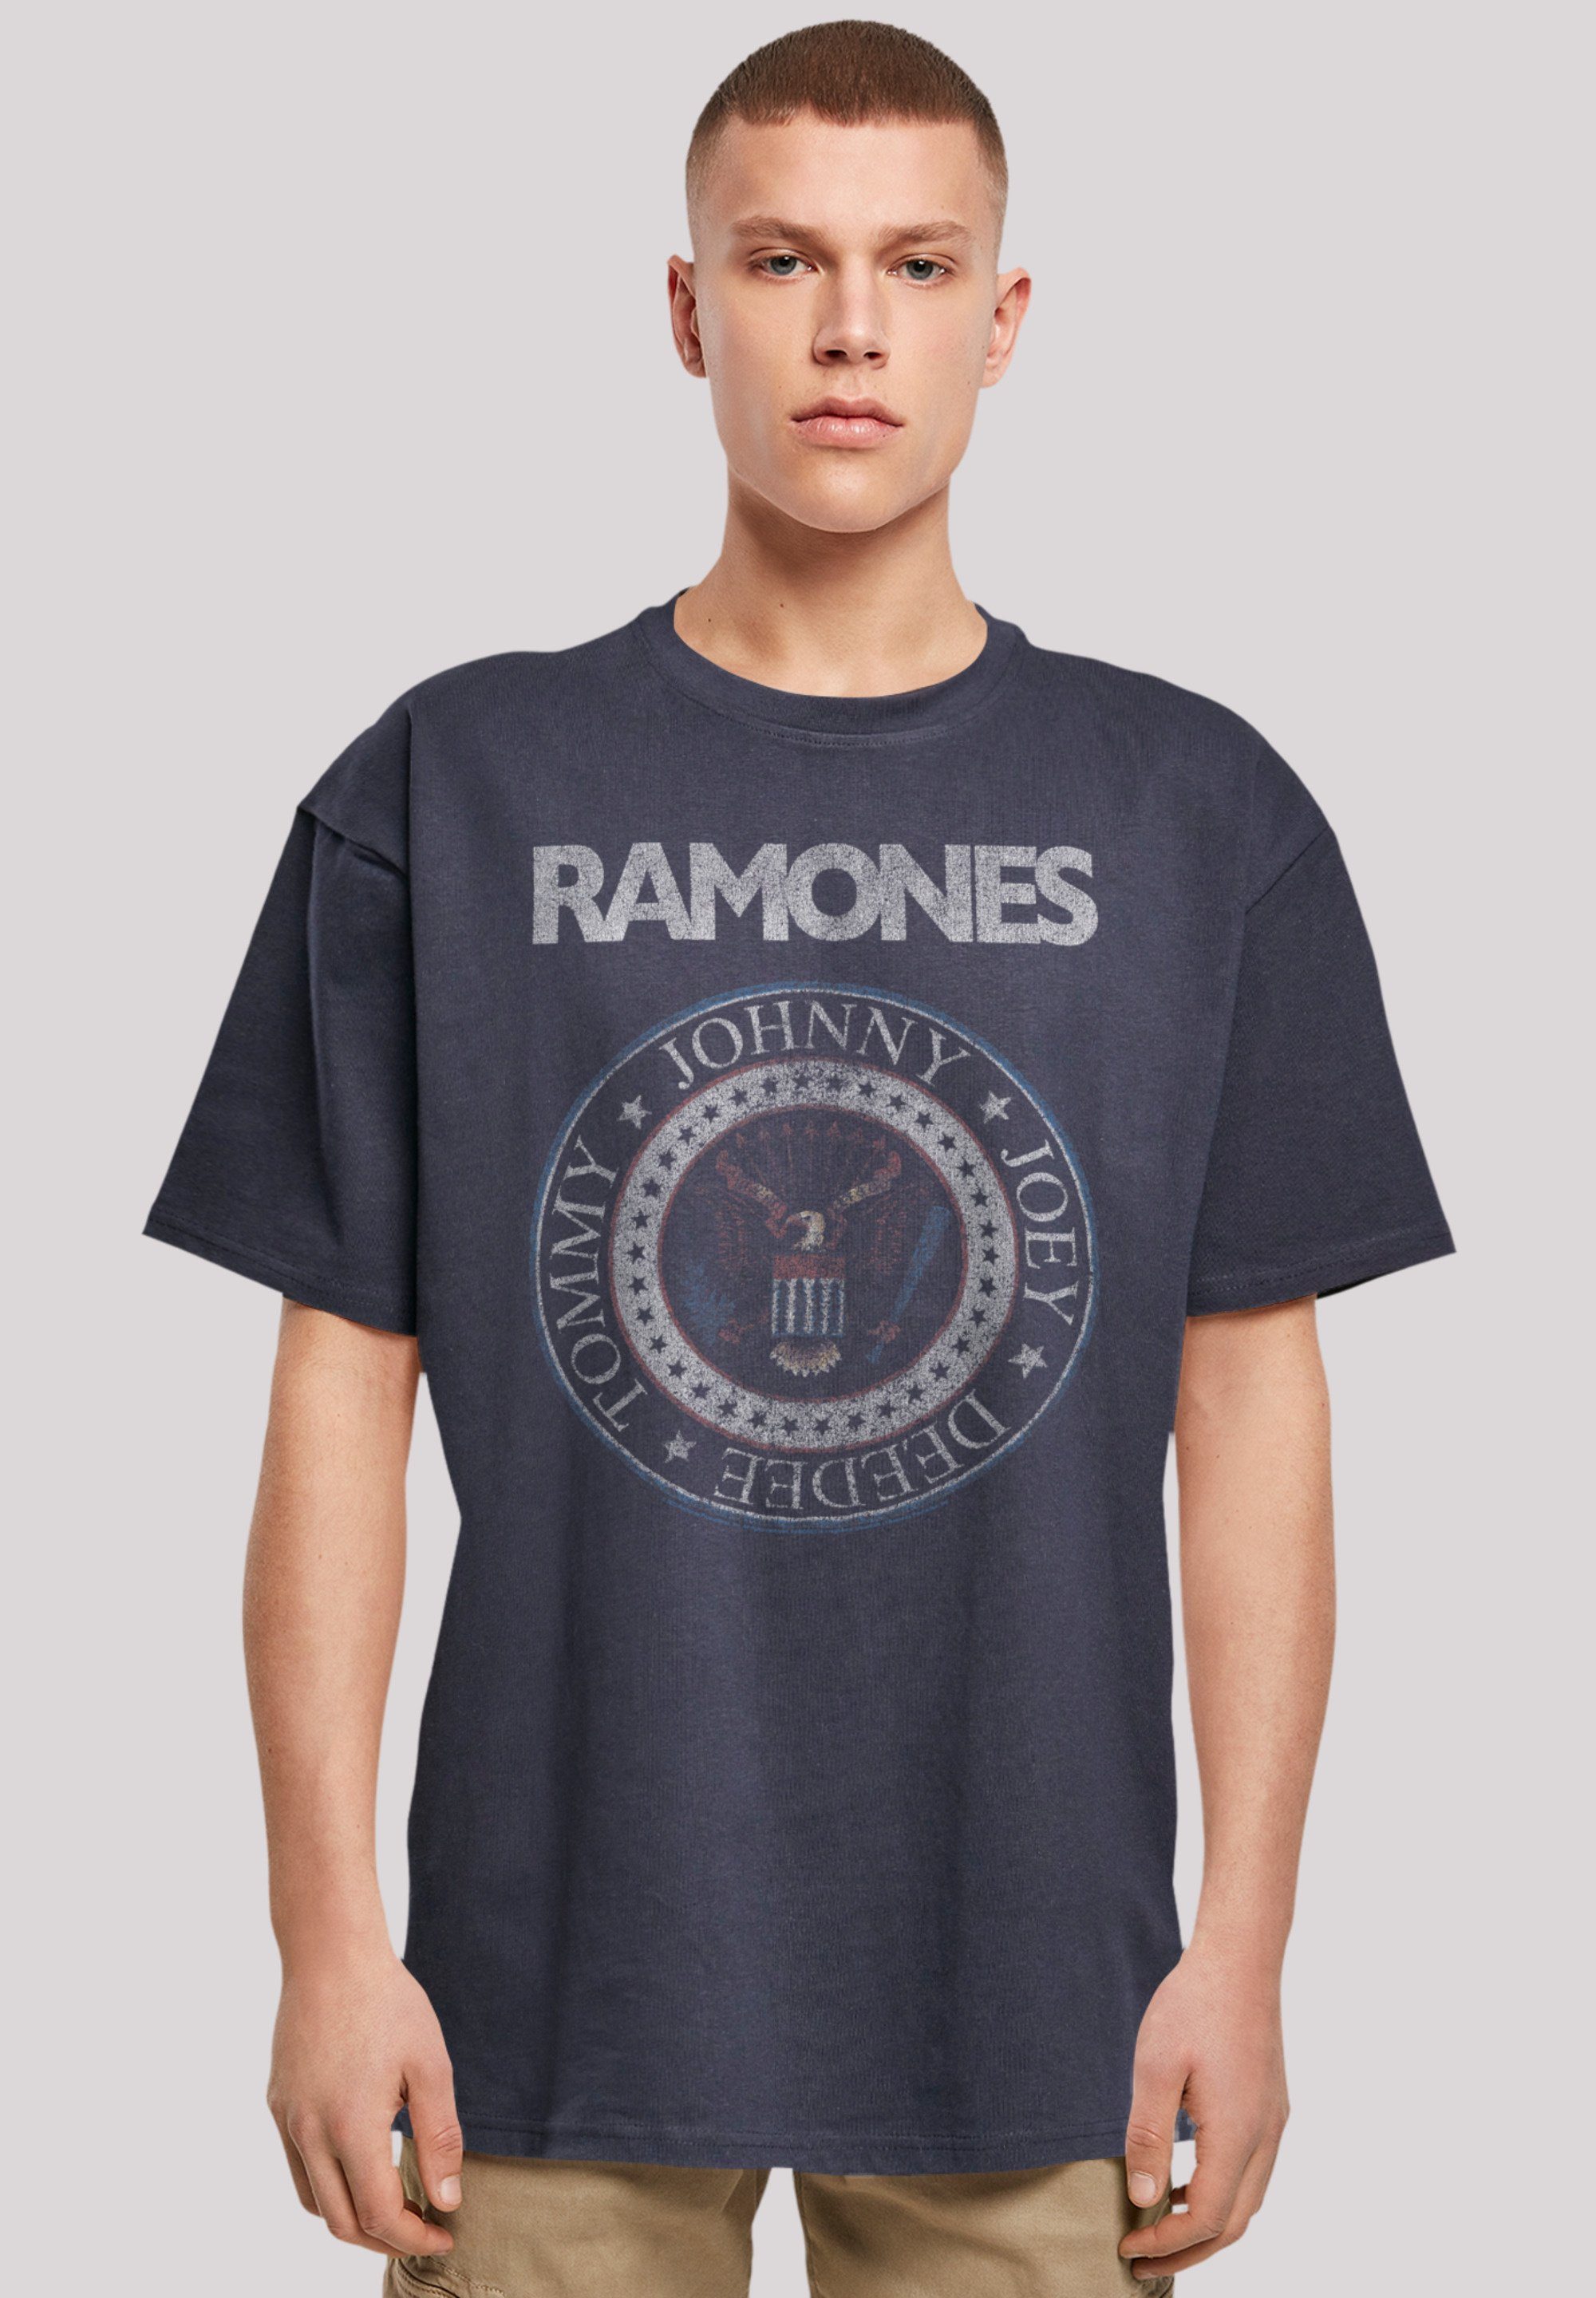 Seal And Qualität, Musik White Rock-Musik Band Ramones F4NT4STIC Rock T-Shirt navy Premium Red Band,